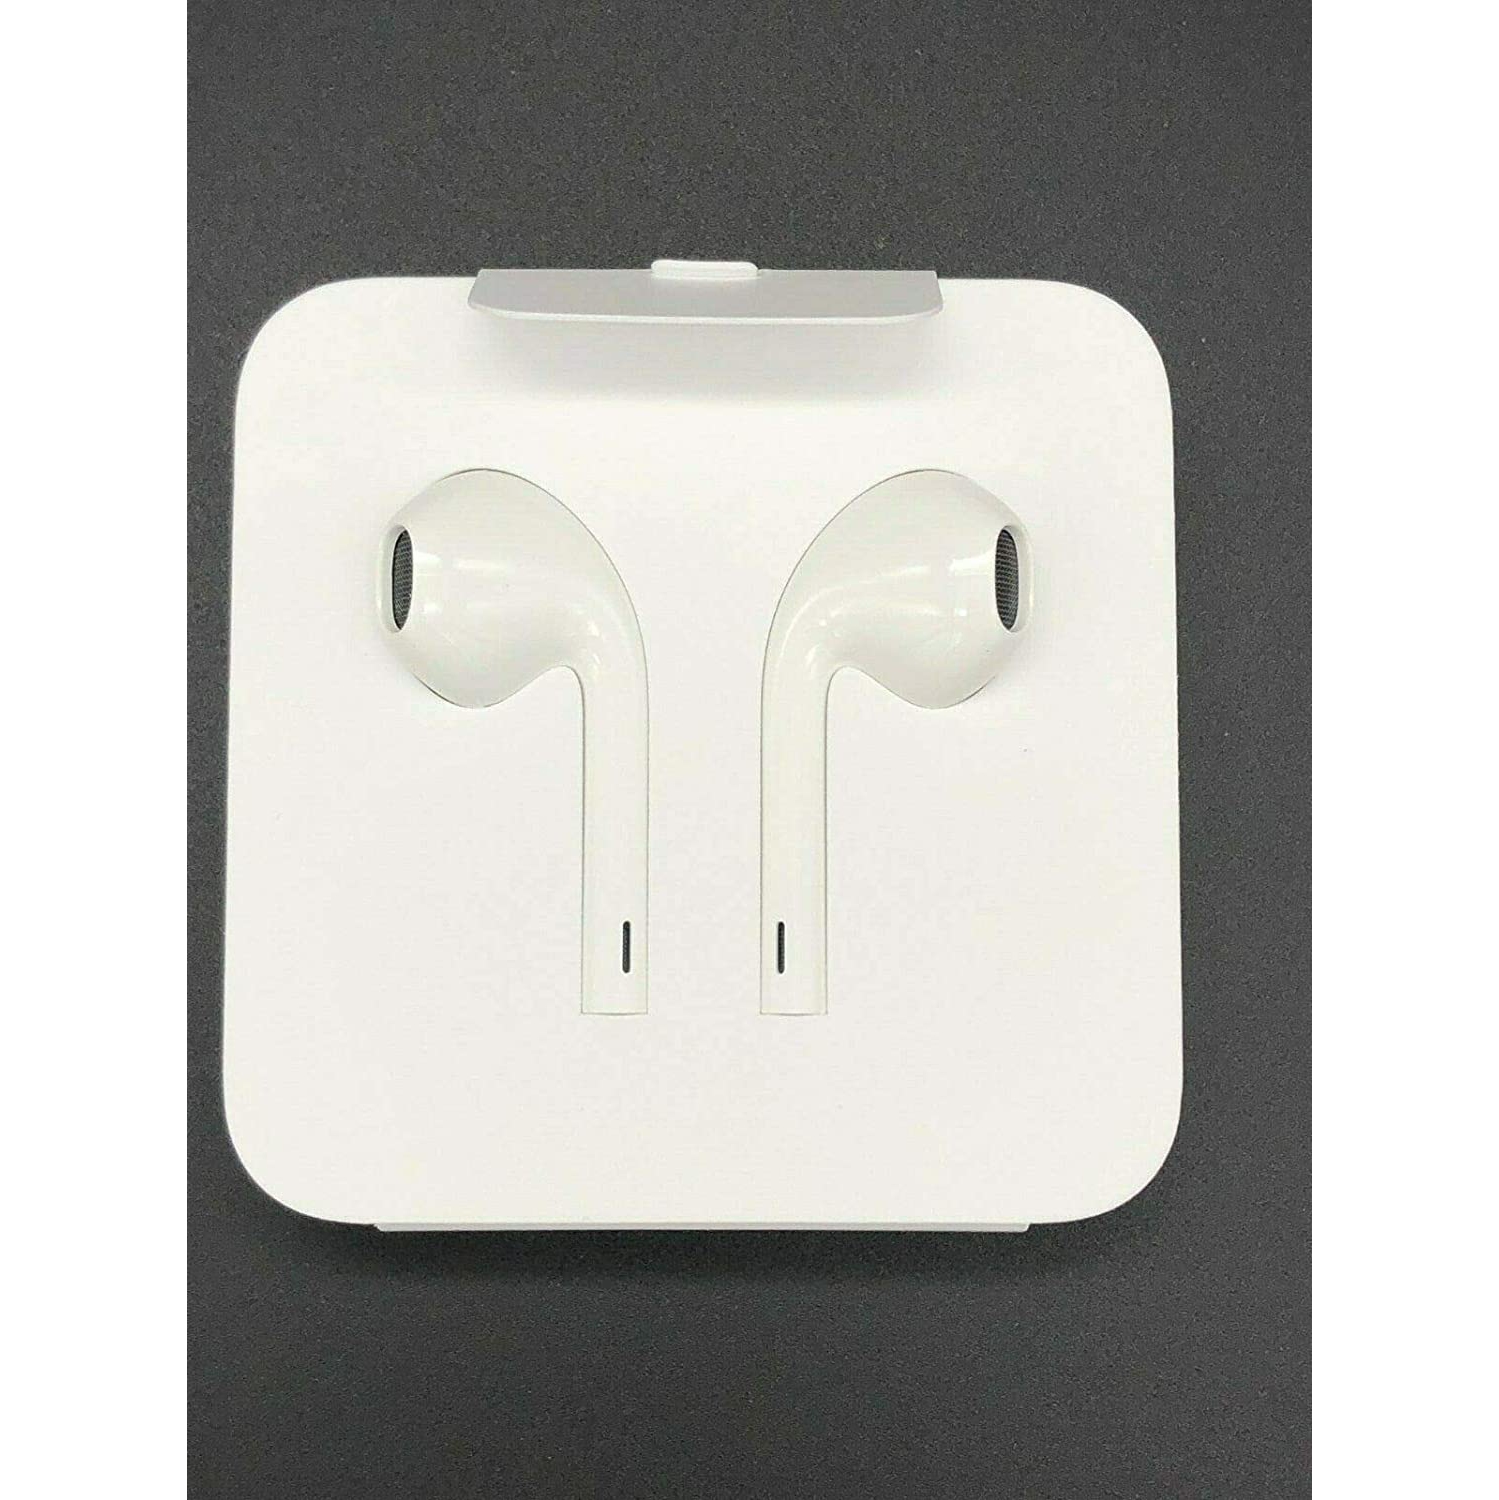 Apple Lightning Headphones for iPhone 7, 8, Plus and X with Microphone and Built in Remote, EarPods with Lightning Connector MMTN2ZM/A - White